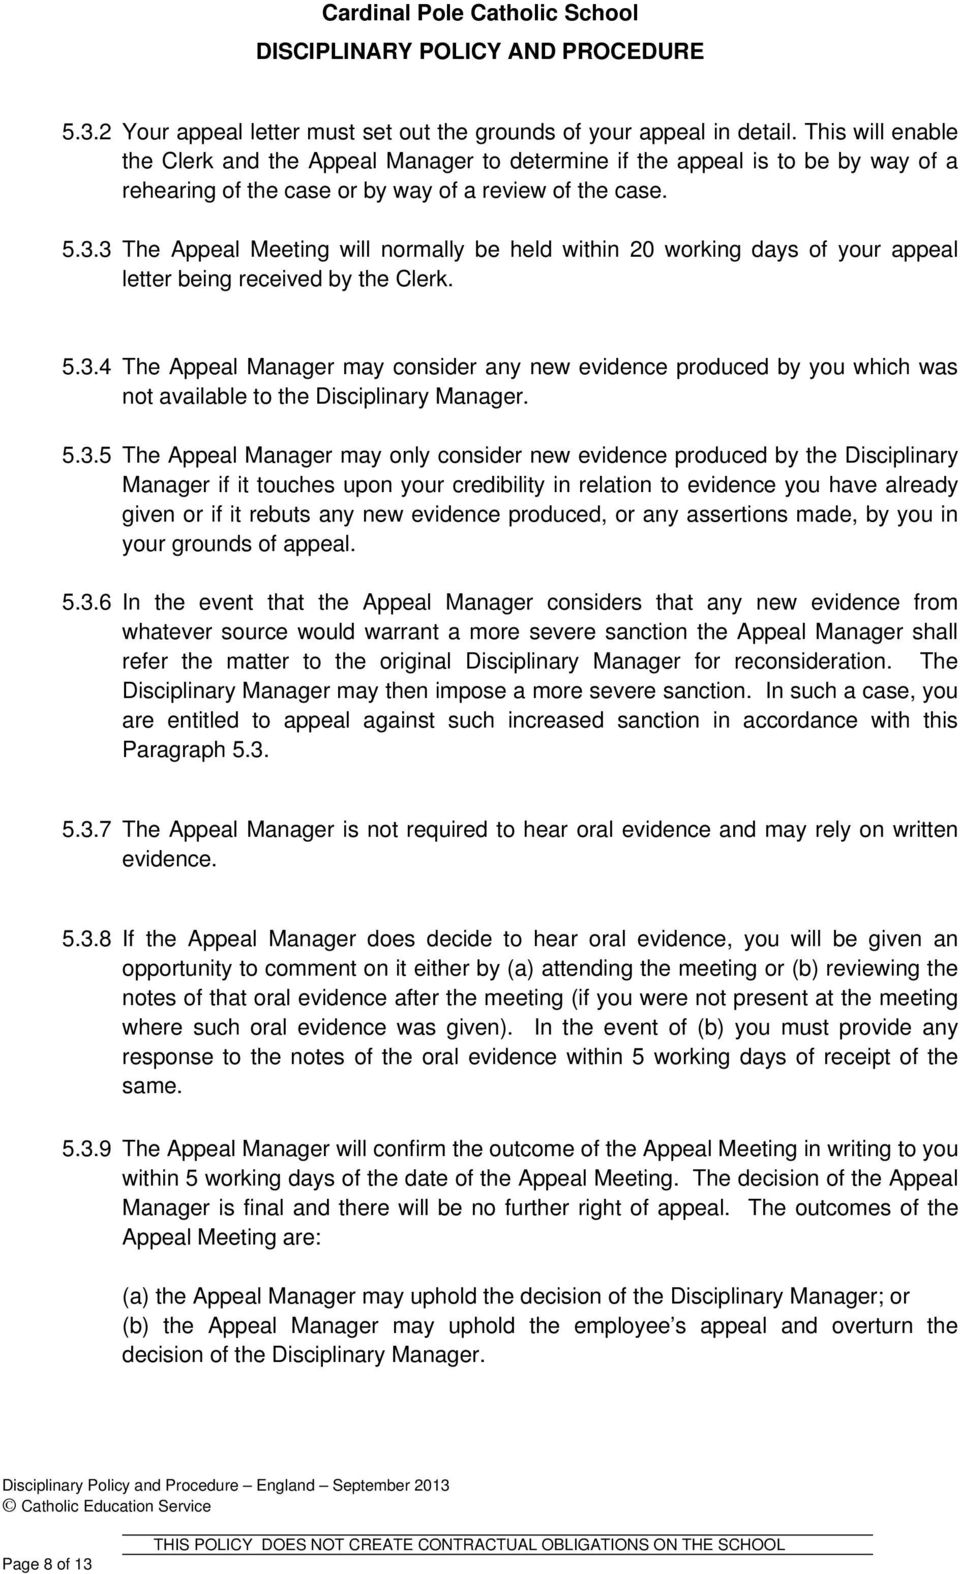 3 The Appeal Meeting will normally be held within 20 working days of your appeal letter being received by the Clerk. 5.3.4 The Appeal Manager may consider any new evidence produced by you which was not available to the Disciplinary Manager.